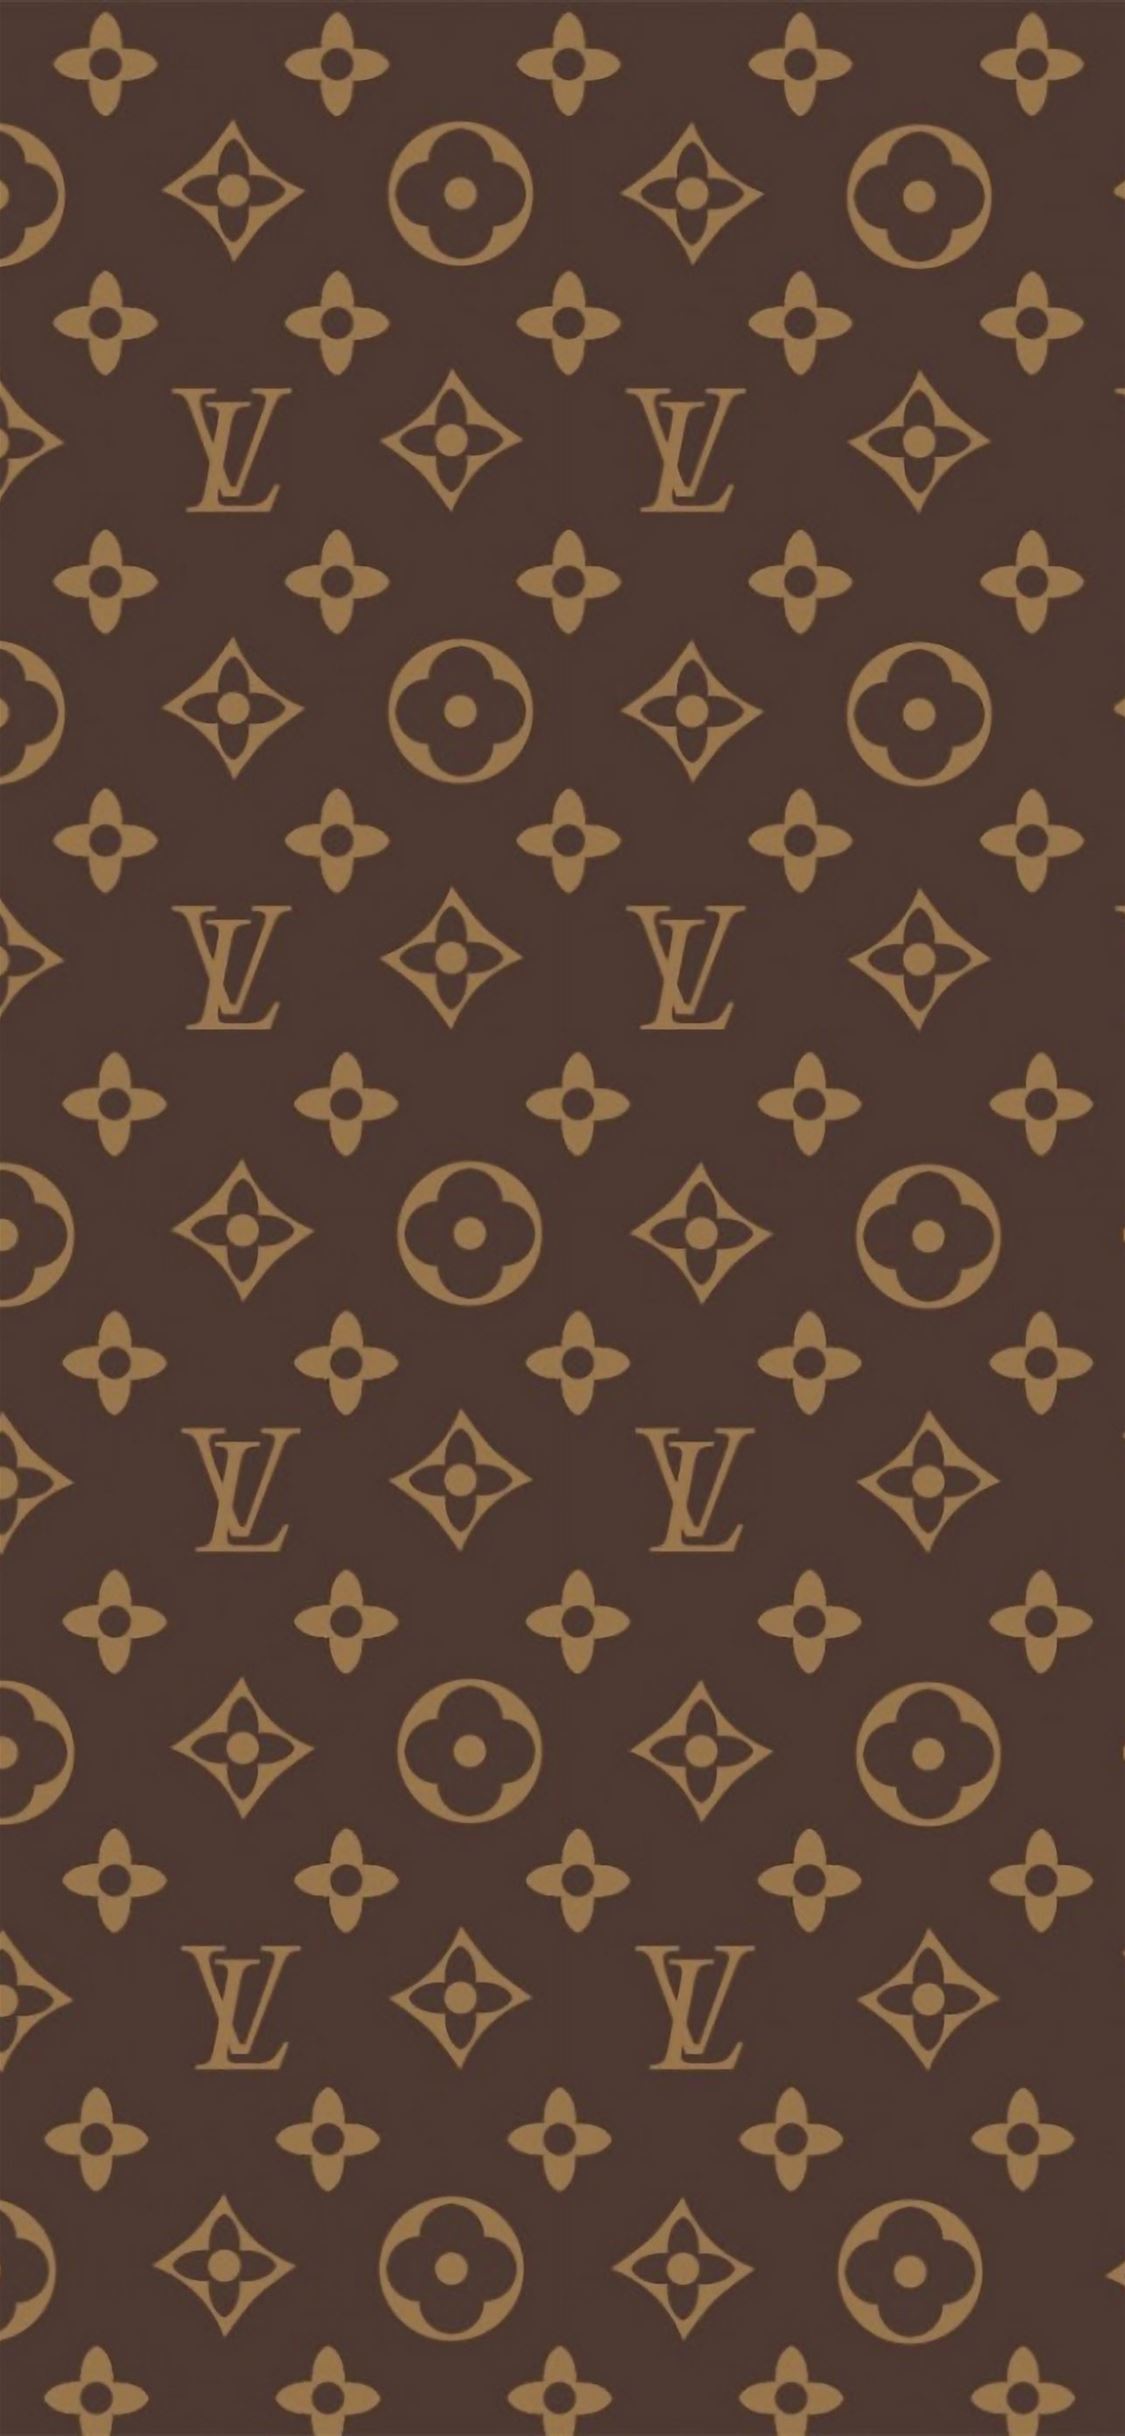 Free download the Louis Vuitton Print wallpaper ,beaty your iphone